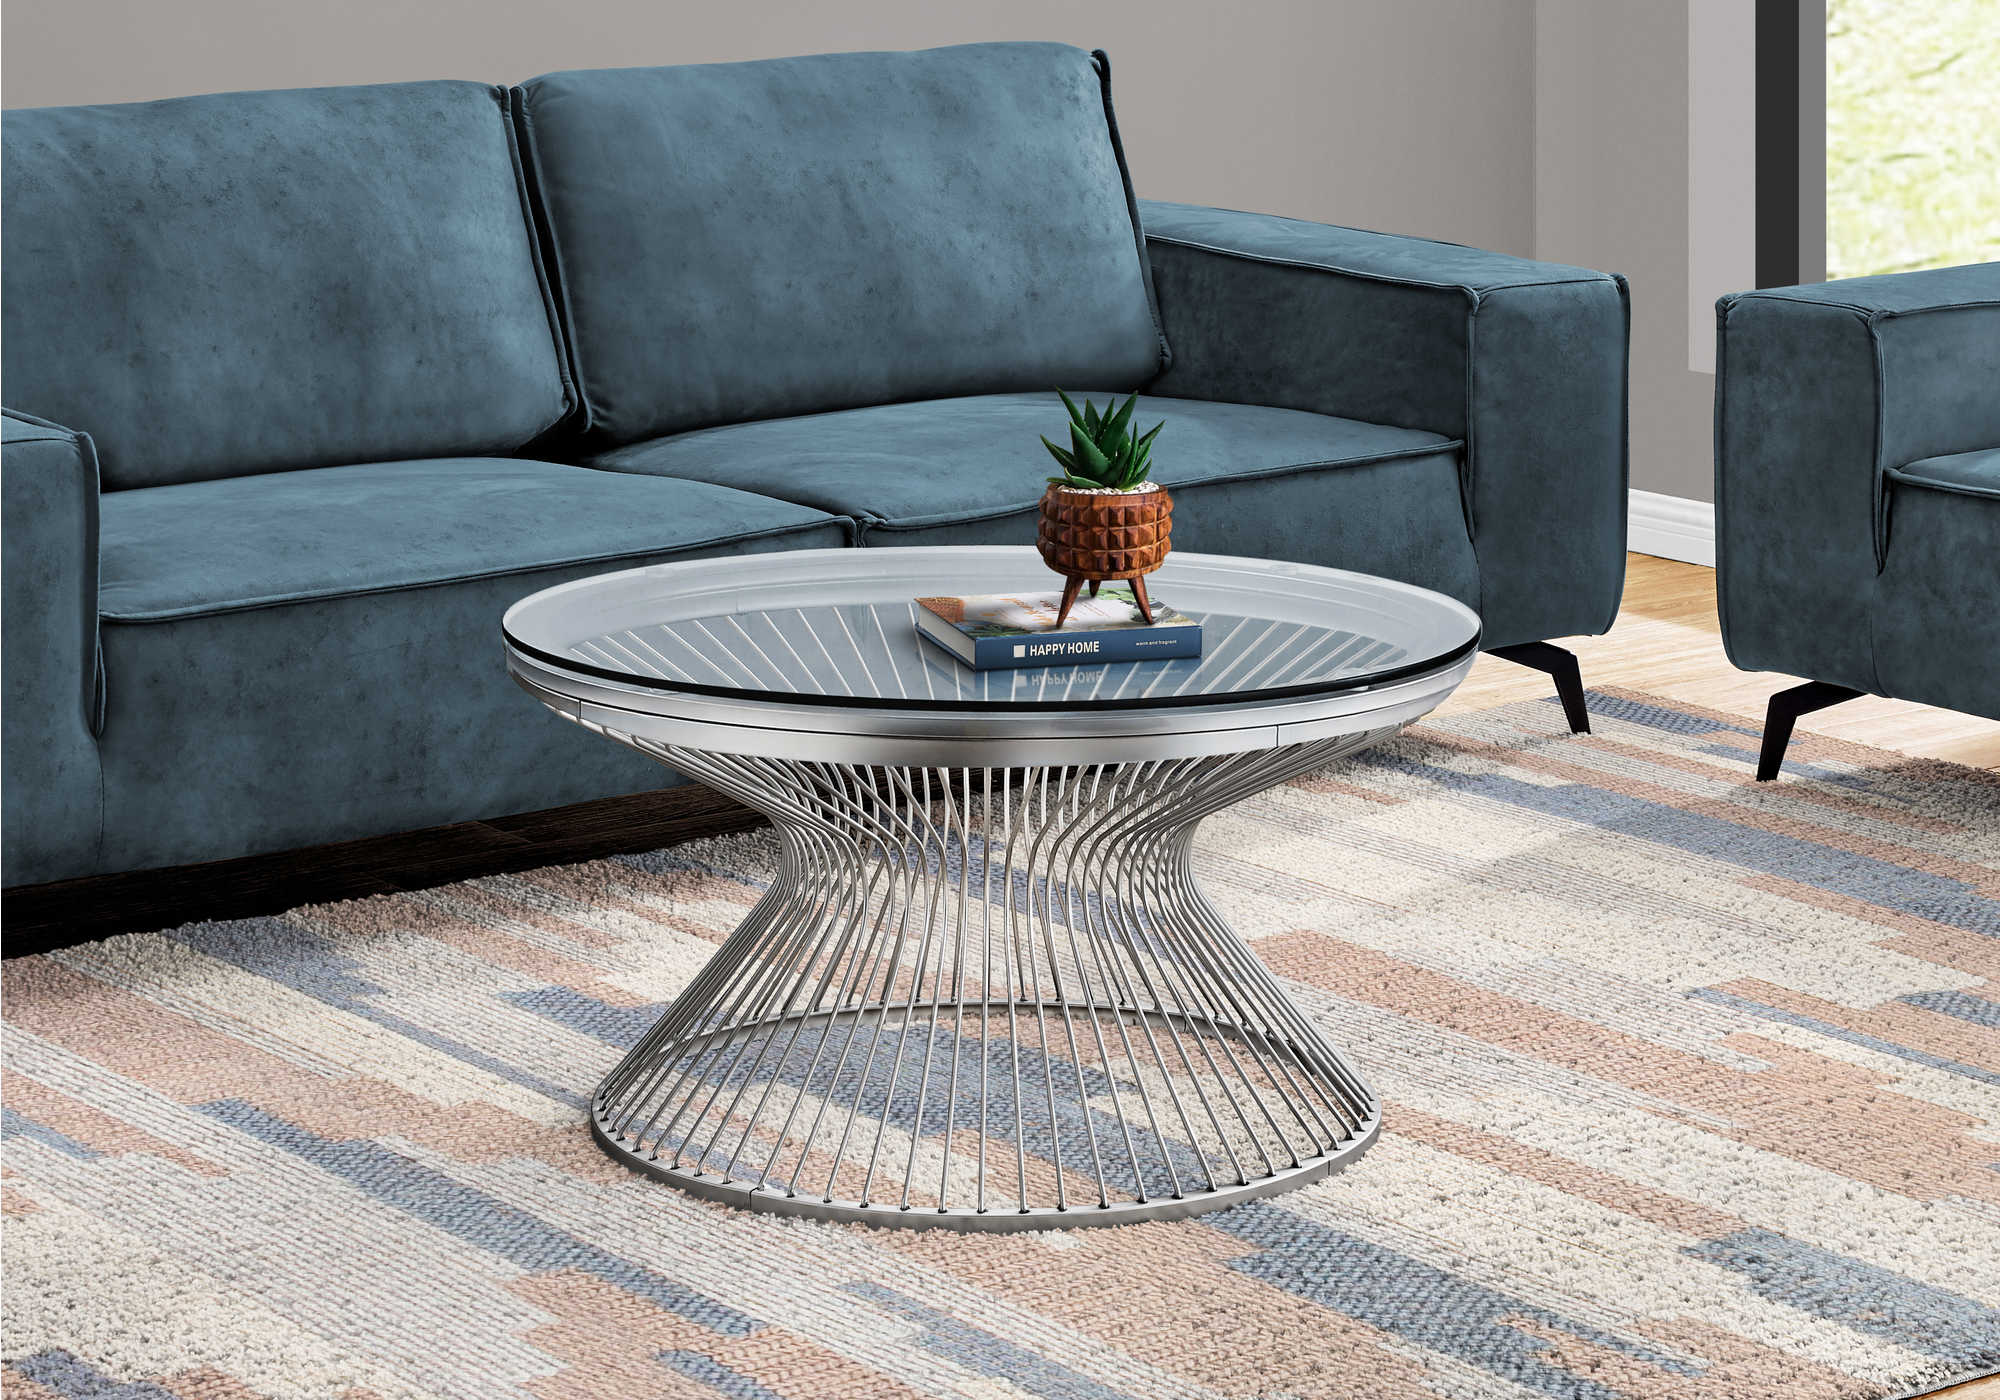 COFFEE TABLE - 36"DIA / STAINLESS STEEL / TEMPERED GLASS